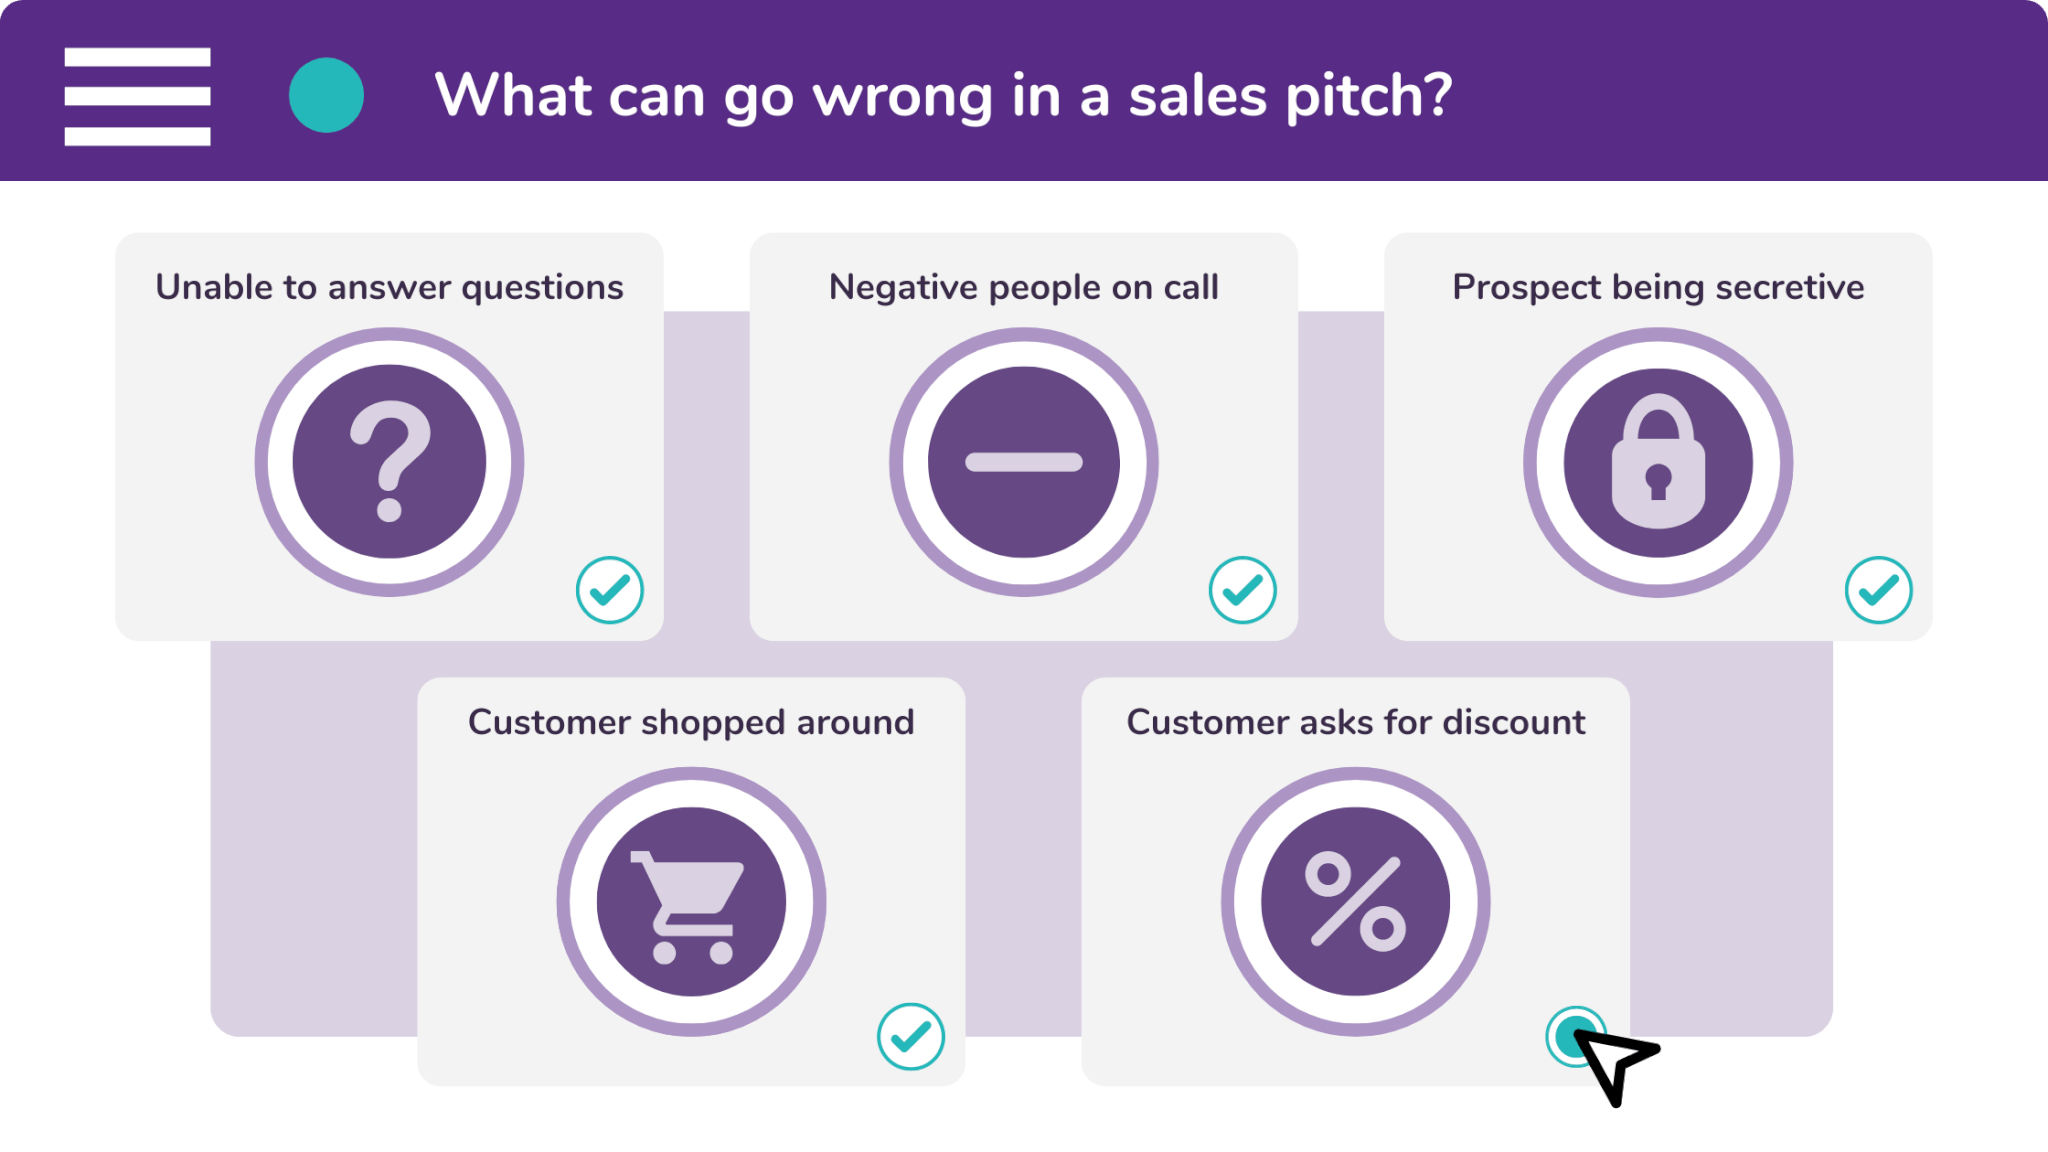 There are five main things that can go wrong in a sales pitch, from negative customers to difficult questions.